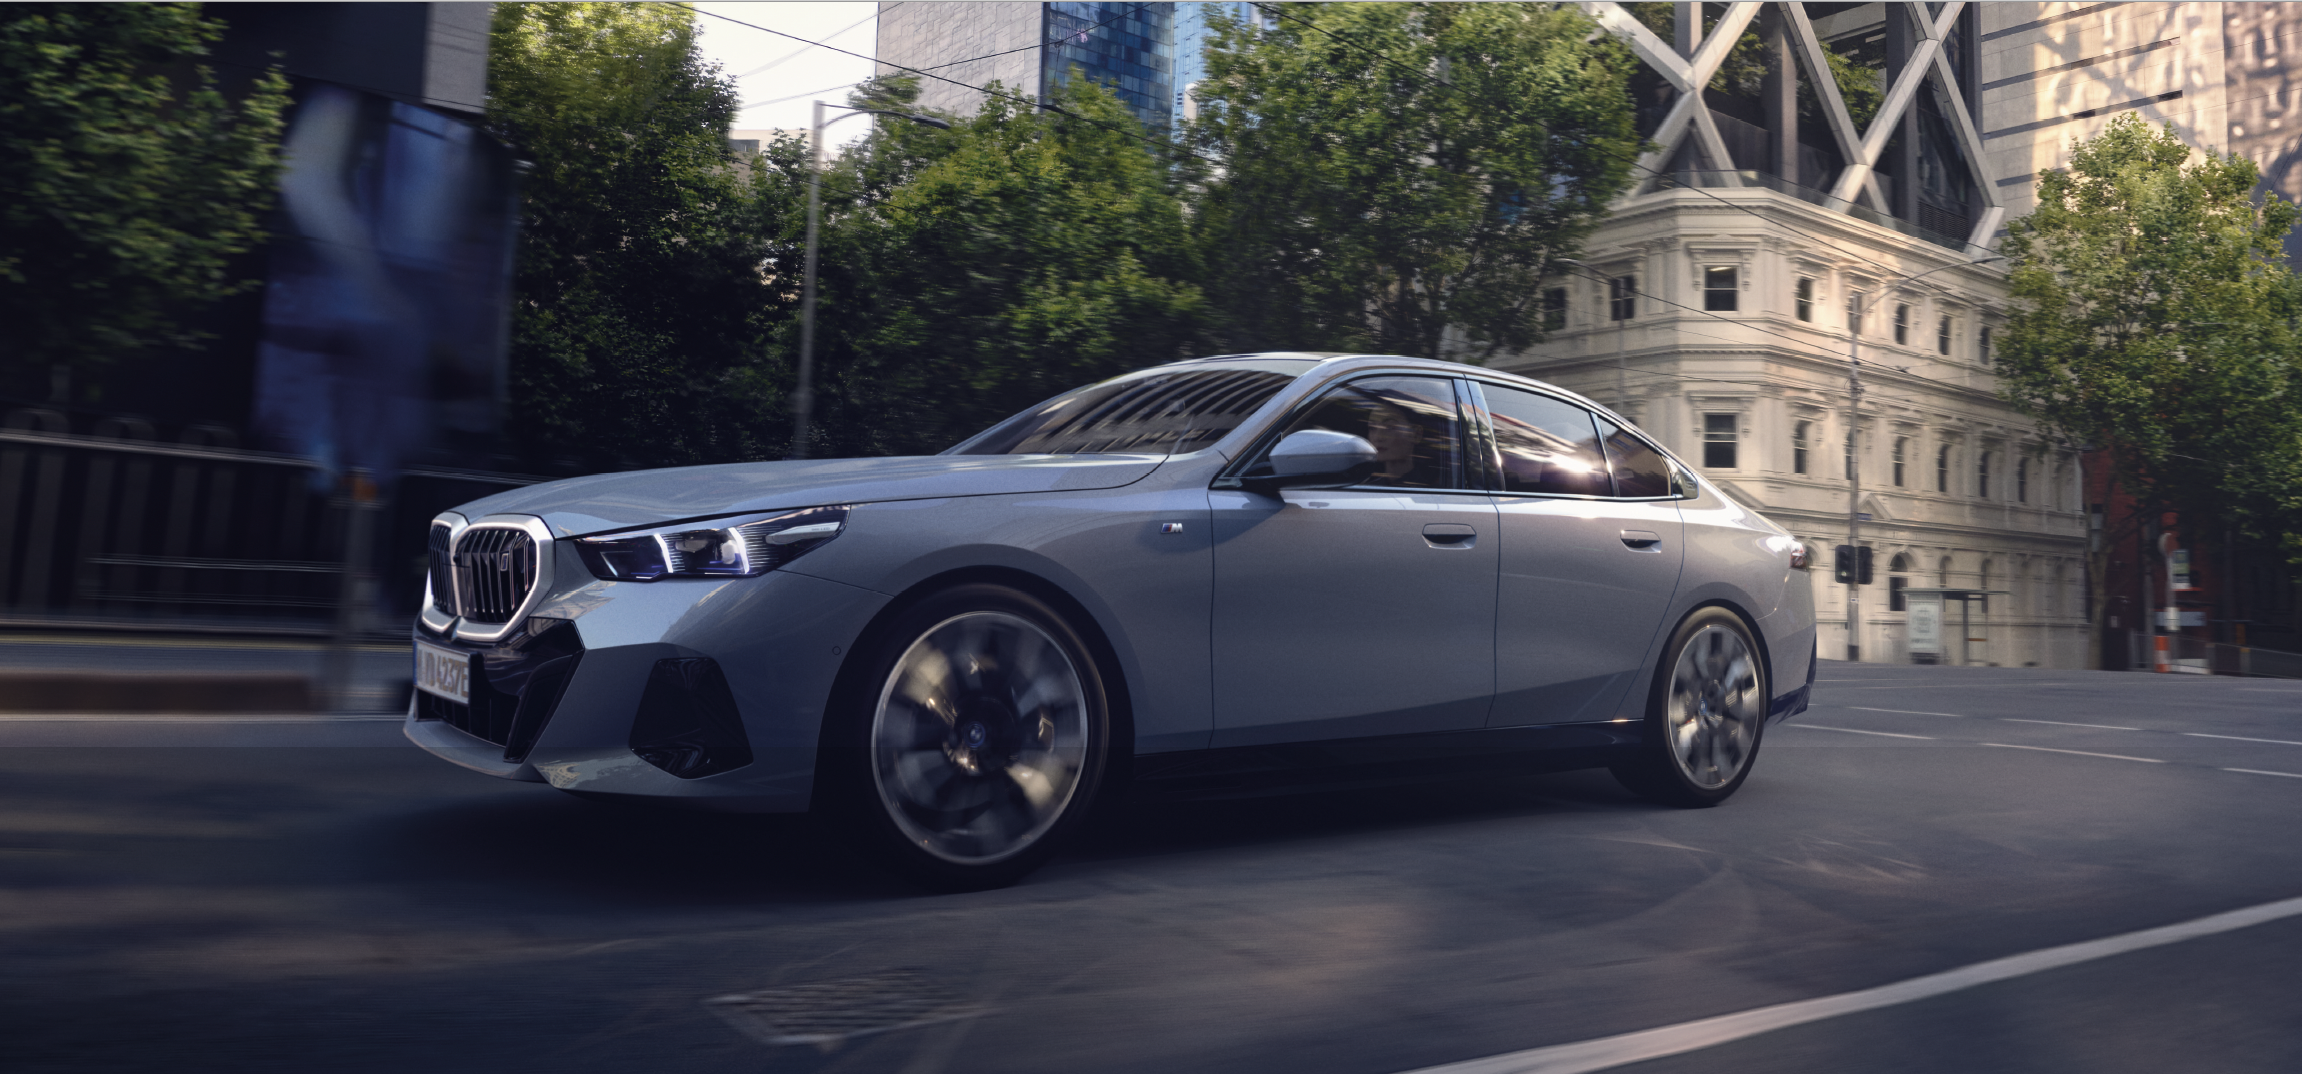 The all-electric BMW i5